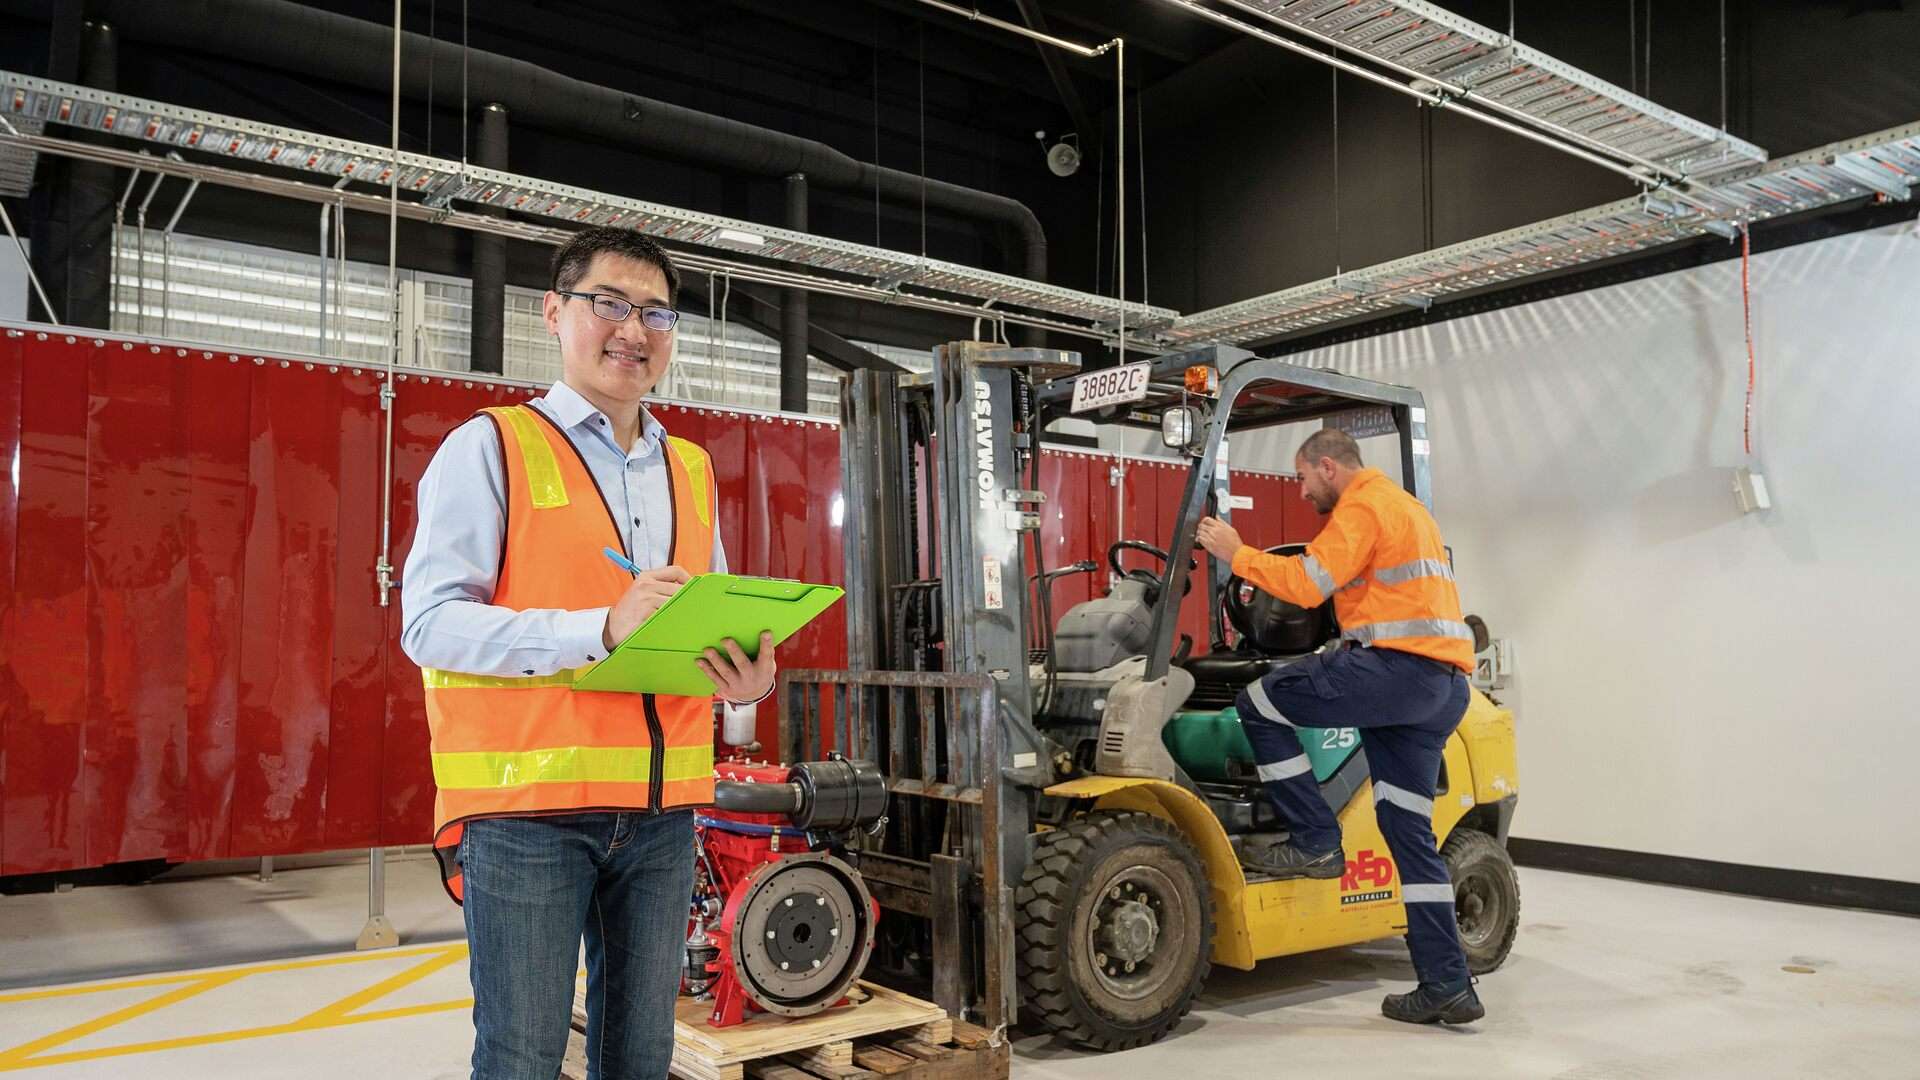 A student wearing a high vis vest holds a clipboard while a person in high vis workwear climbs into a forklift in the background.